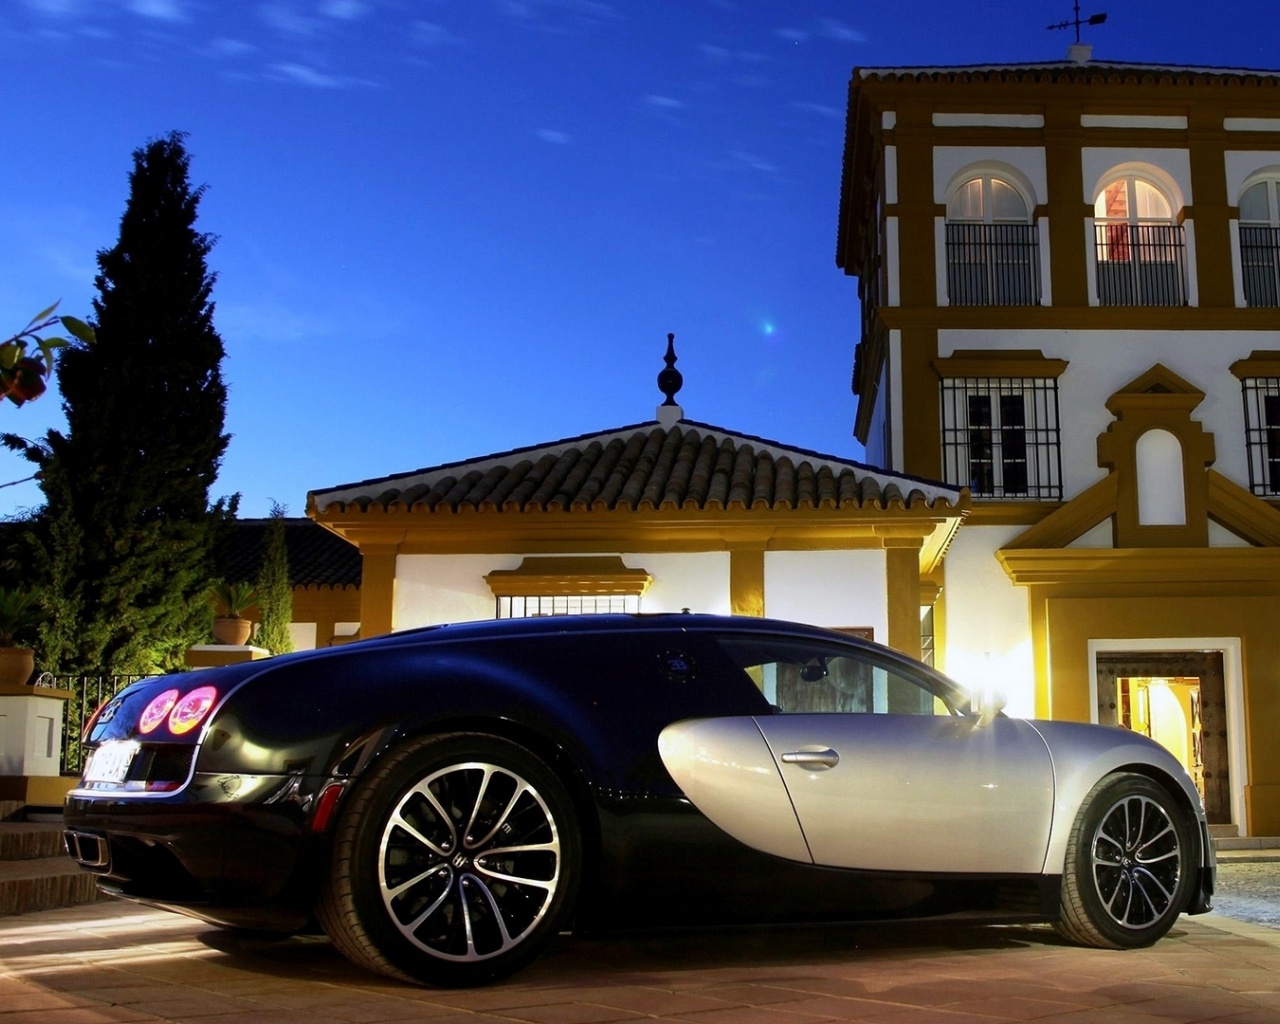 Dream Cars And House - HD Wallpaper 